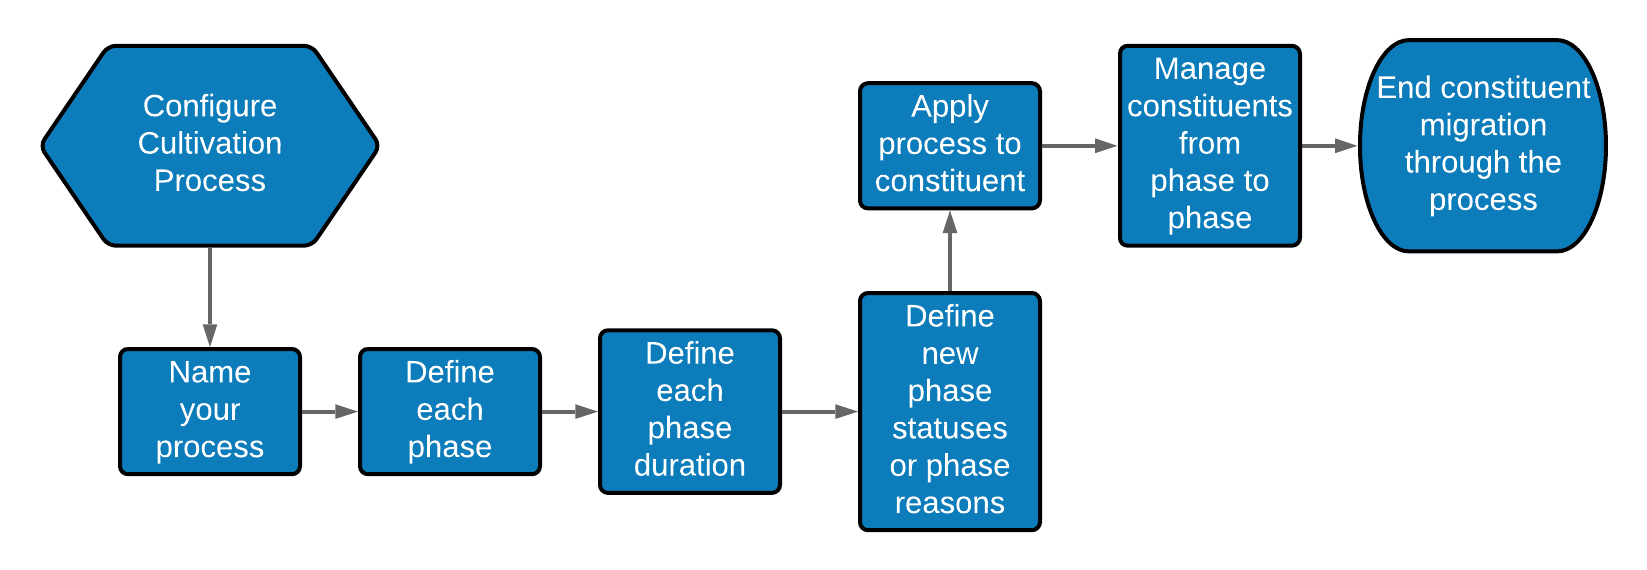 Cultivation_Workflow.png